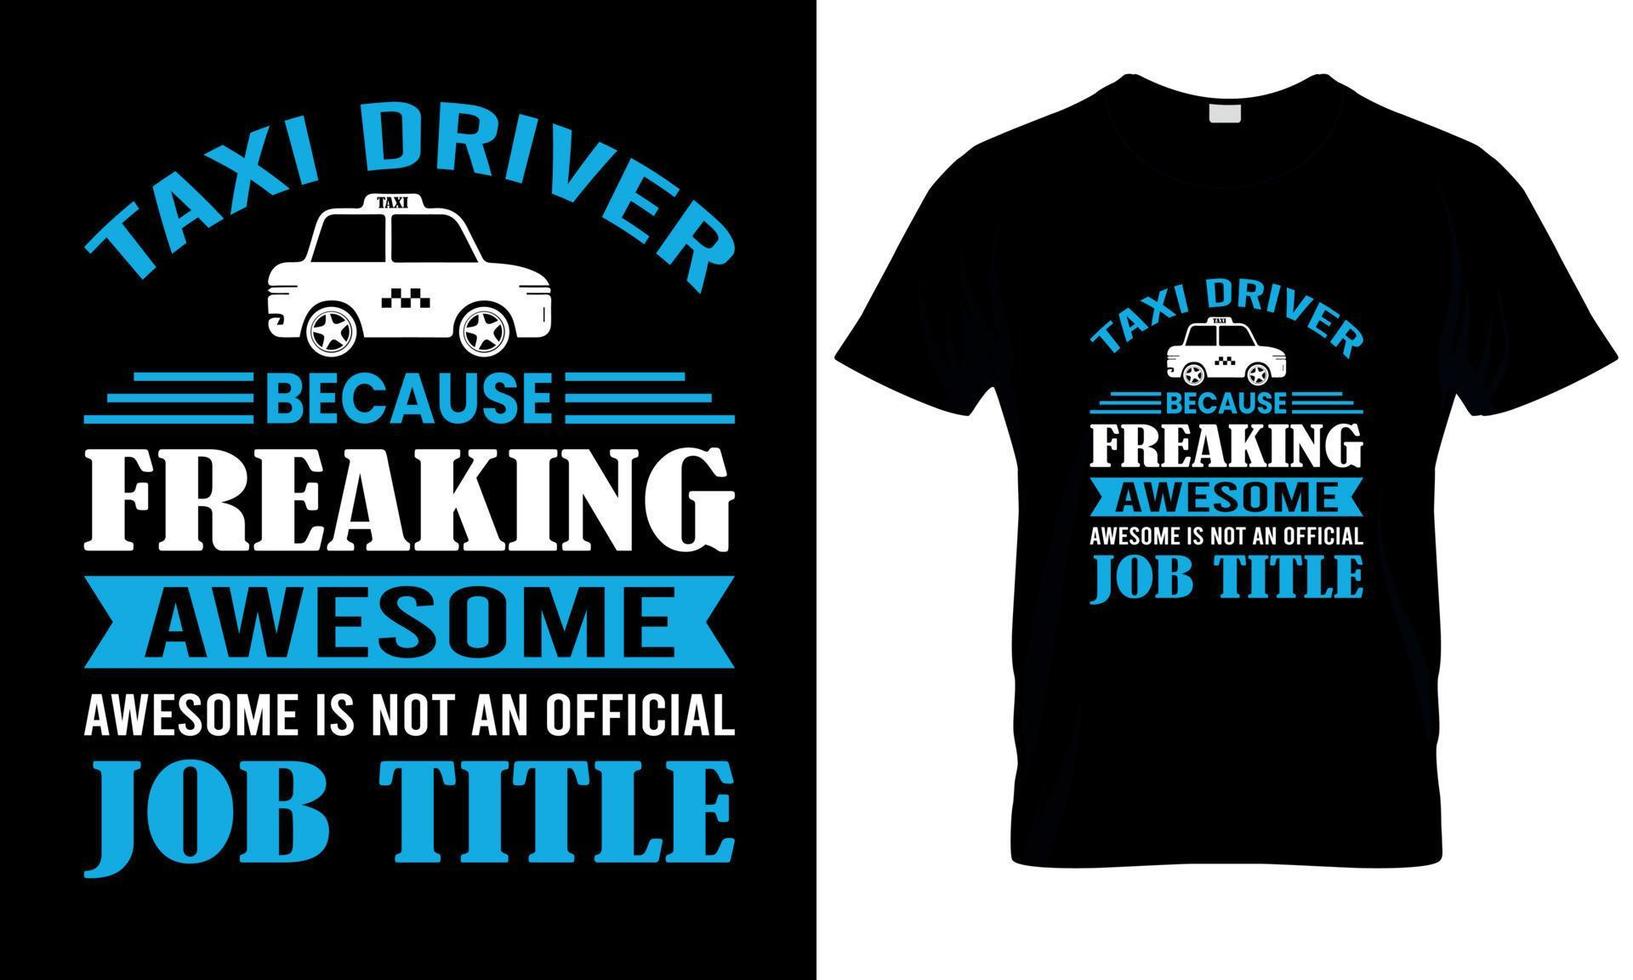 Taxi driver because freaking awesome is not an official job title. vector